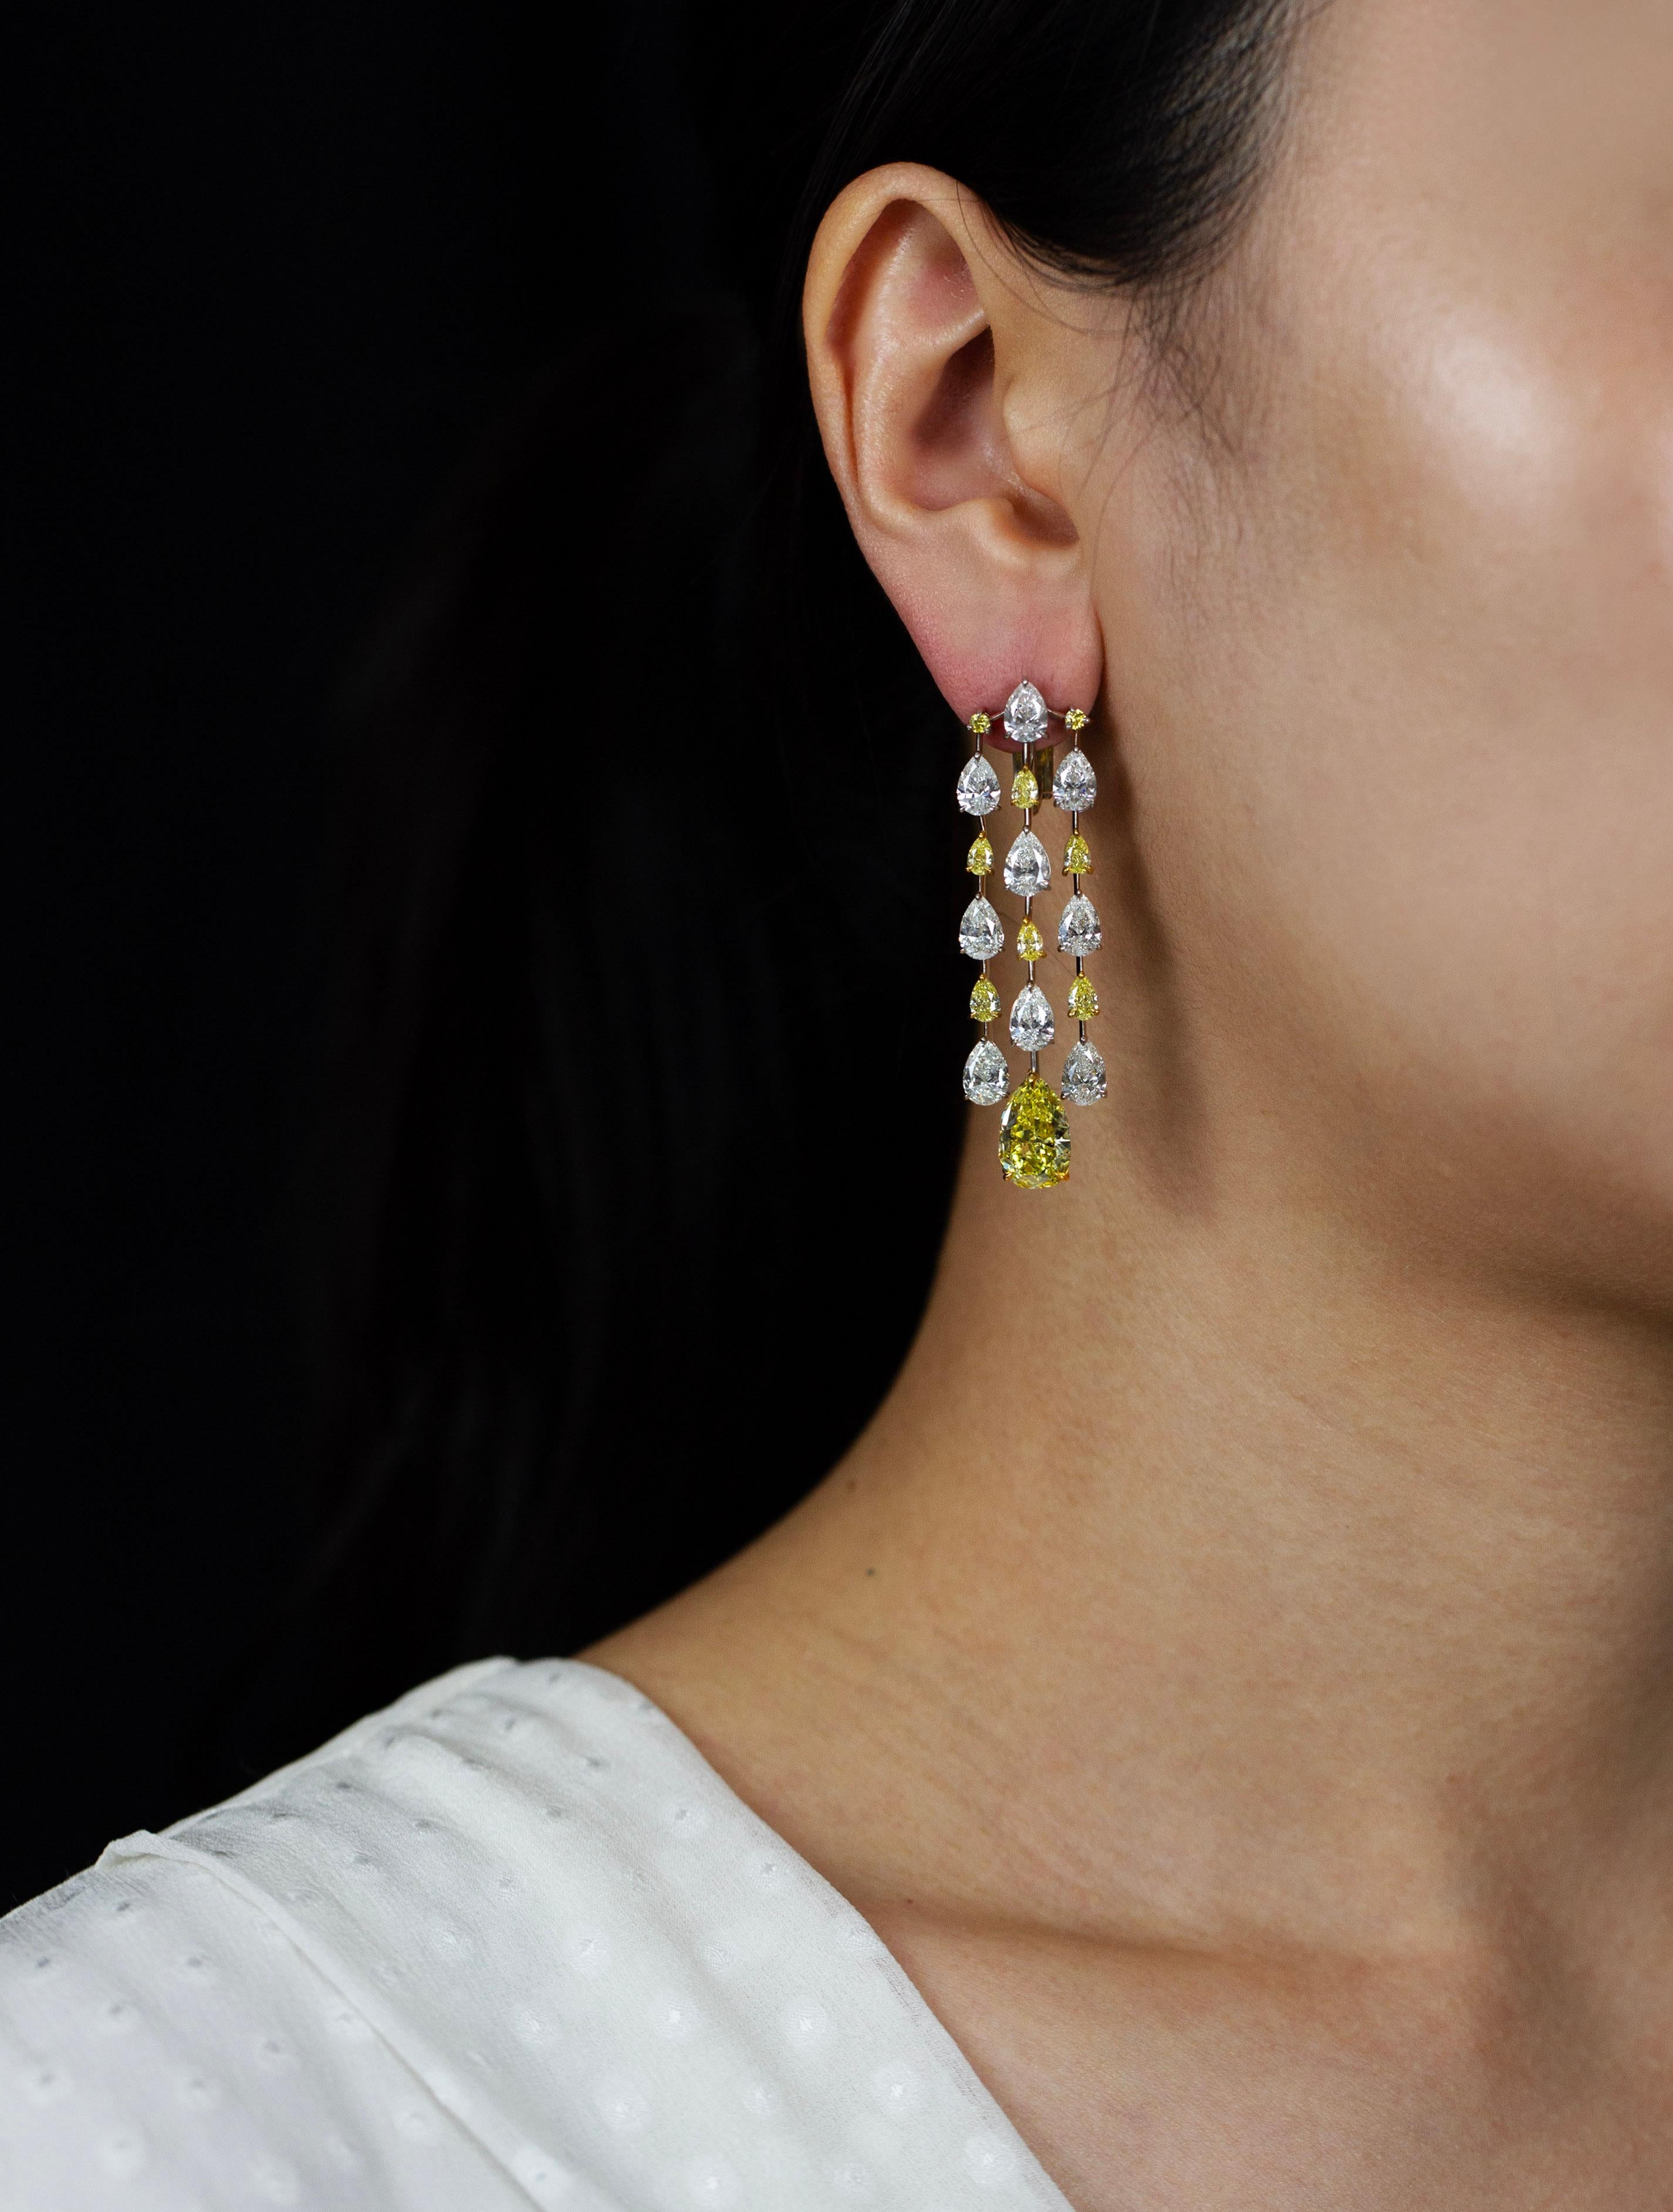 These are one-of-a-kind chandelier earrings crafted by Roman Malakov Diamonds, featuring two GIA certified fancy intense yellow pear shaped diamonds weighing 2.47 and 2.41 carats respectively. They elegantly suspends on rows of alternating yellow